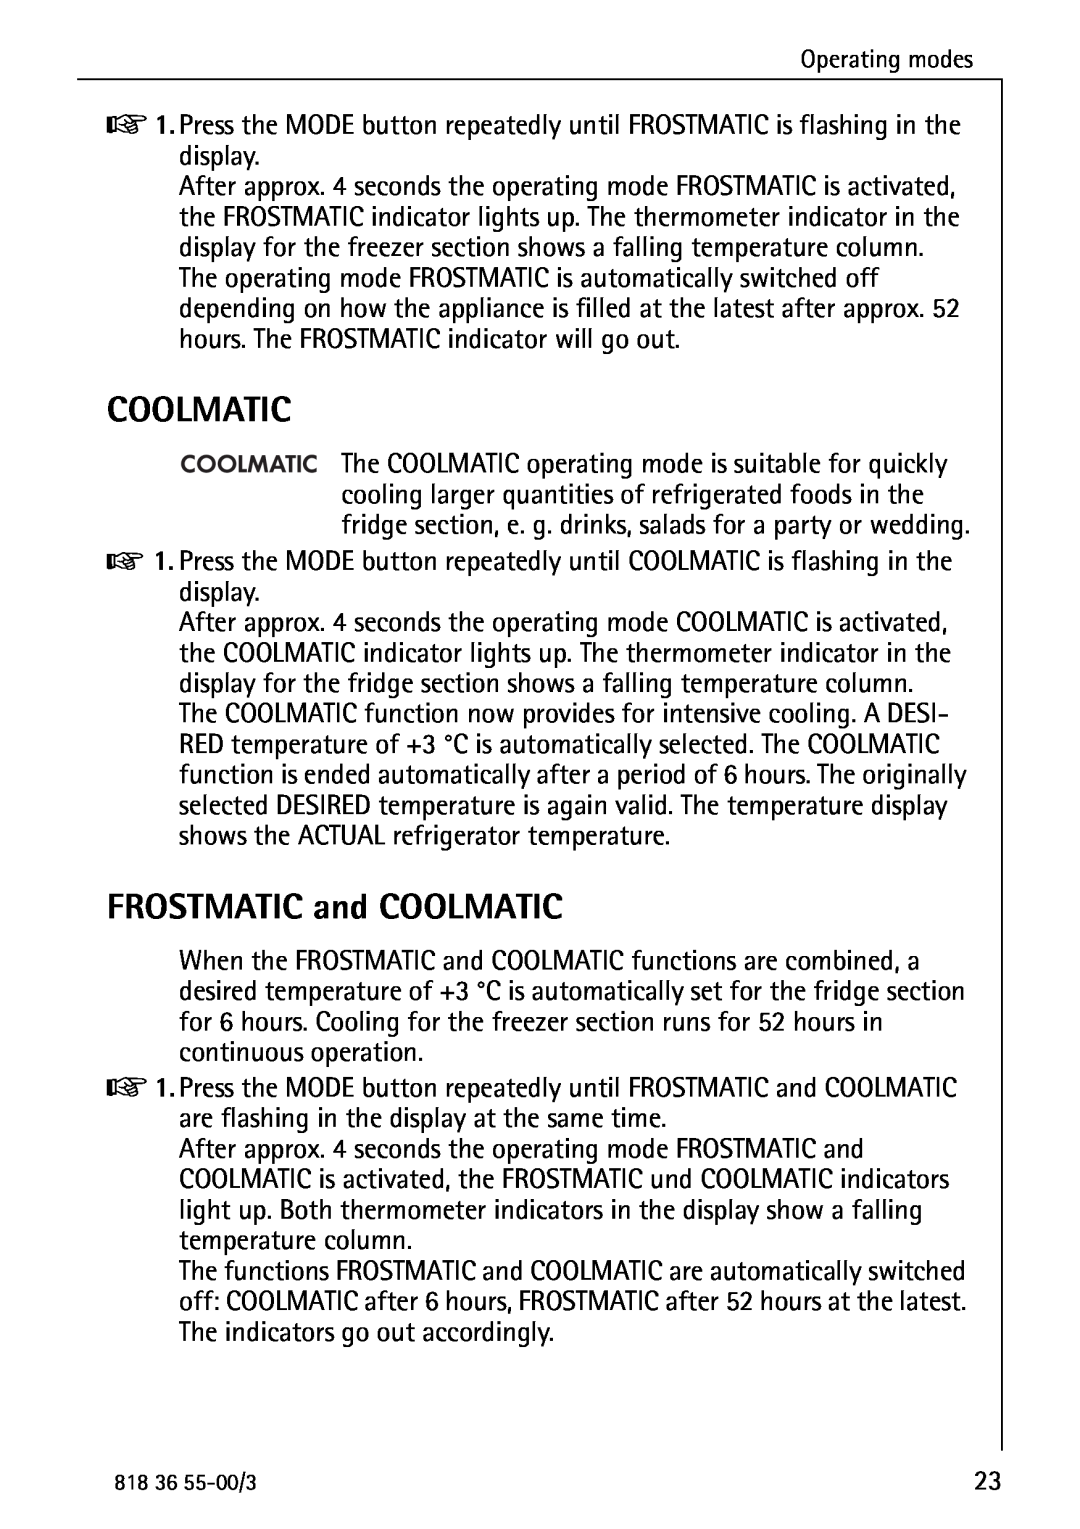 AEG 86378-KG operating instructions Coolmatic, FROSTMATIC and COOLMATIC 